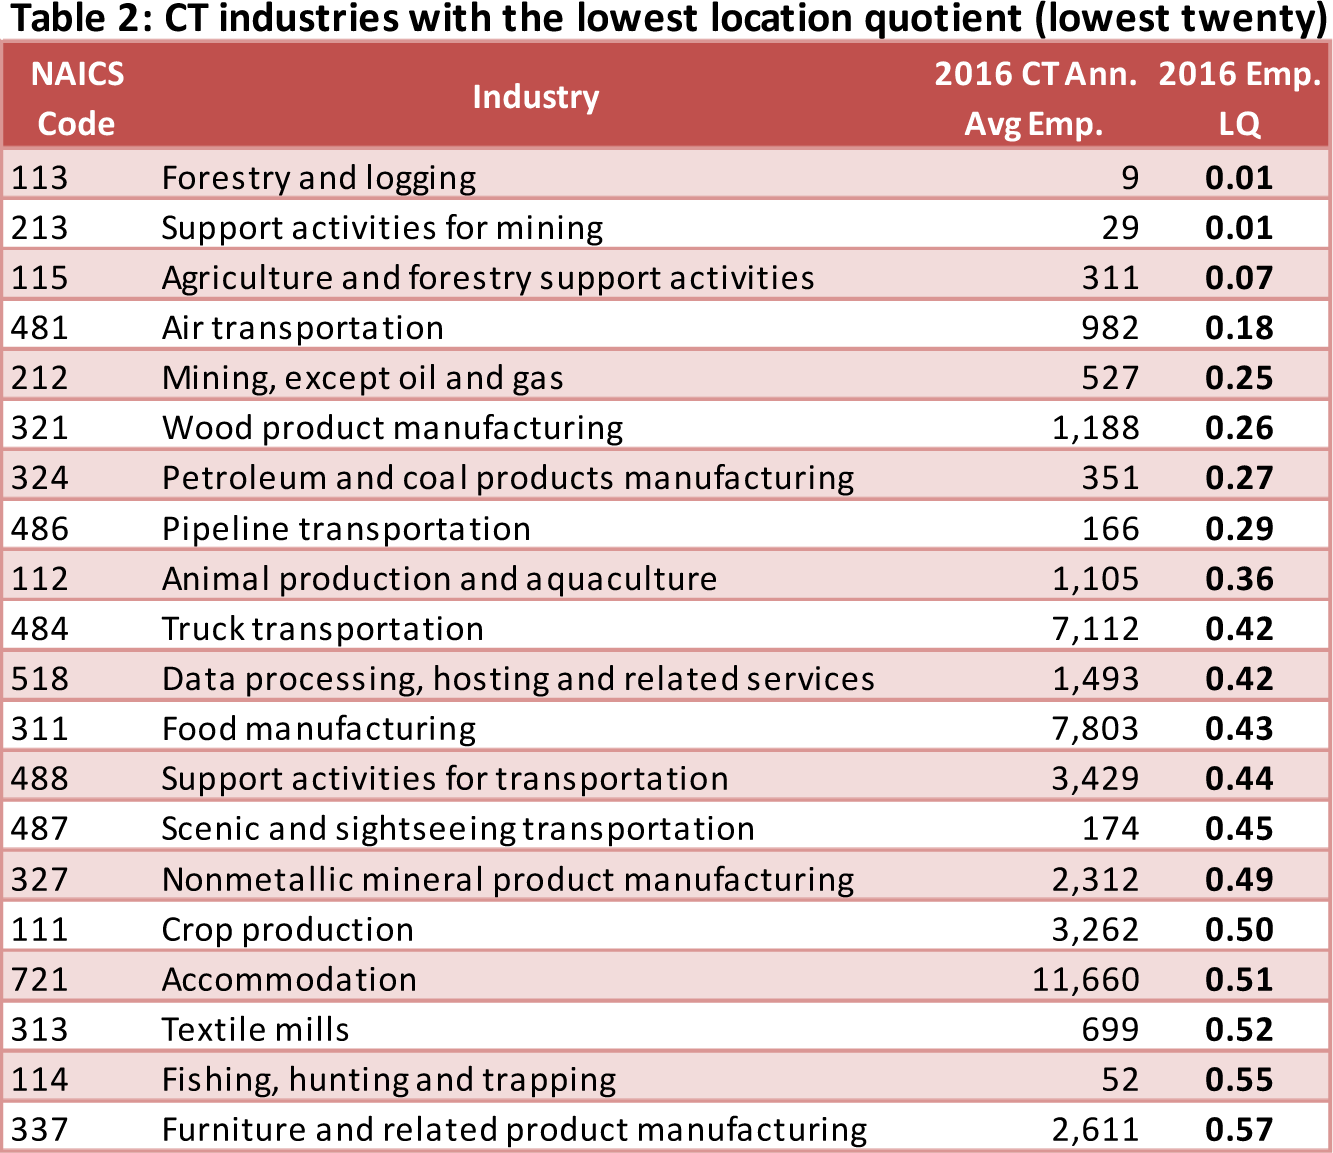 Table 2. CT industries with the lowest location quotient (lowest twenty)